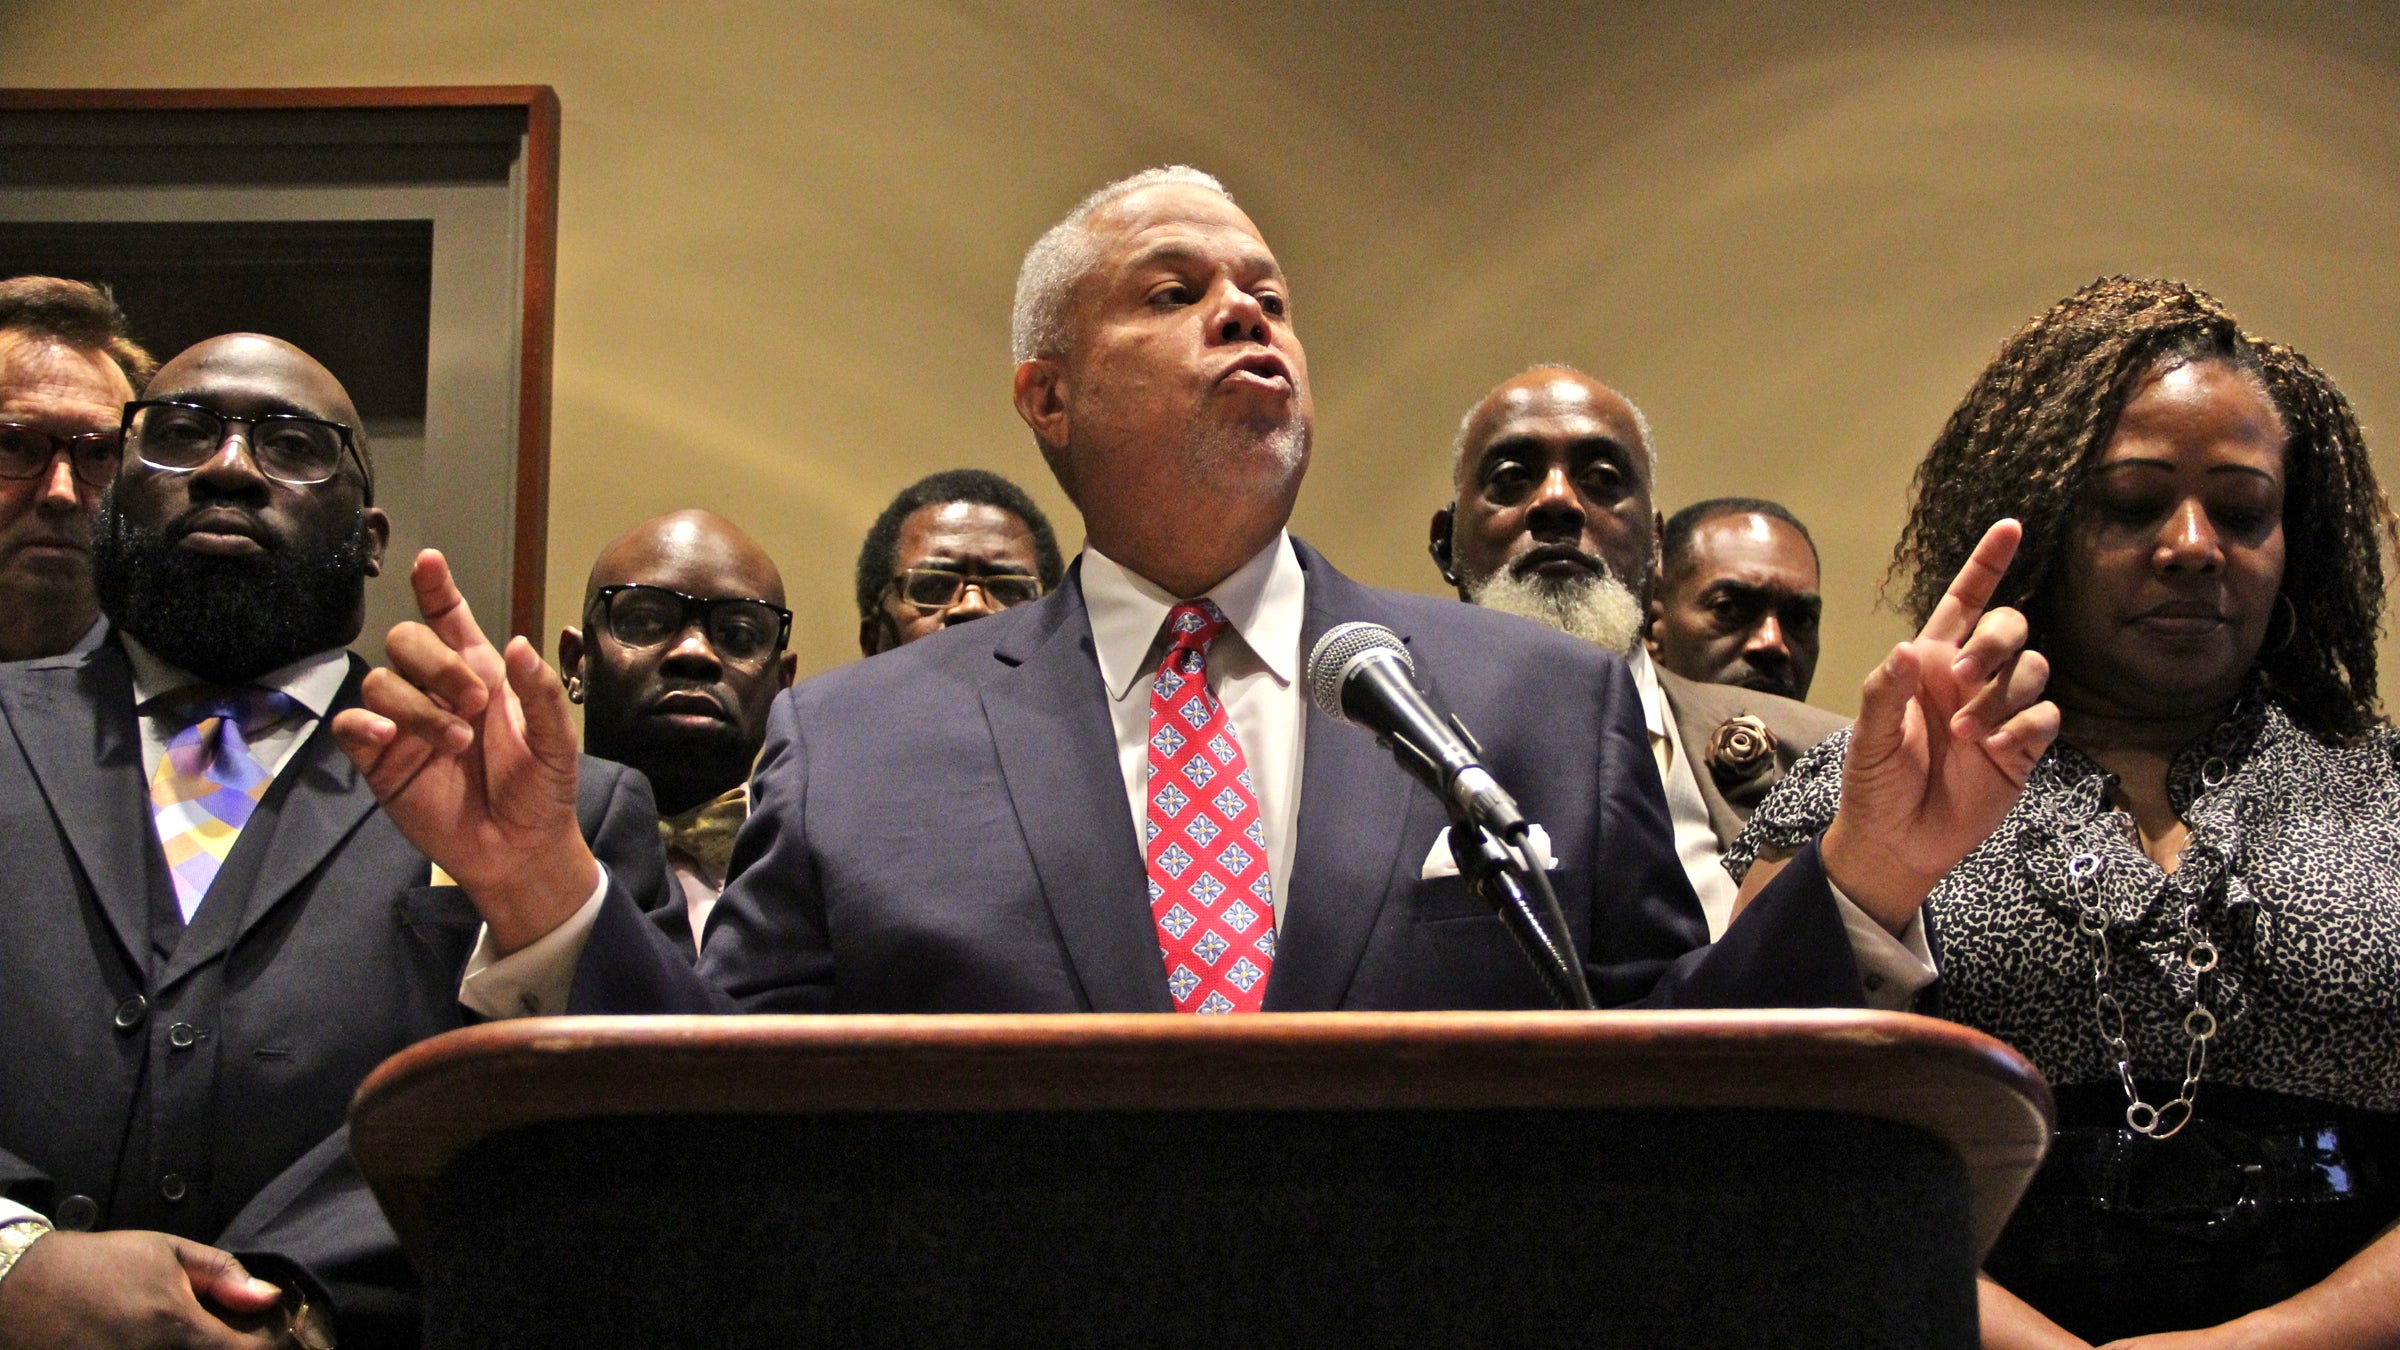  Pennsylvania Sen. Anthony Williams calls for the resignation of state Supreme Court Justice Michael Eakin after reviewing with community leaders the racist, misogynist and pornographic emails he and others passed around on state-owned computers. (Emma Lee/WHYY) 